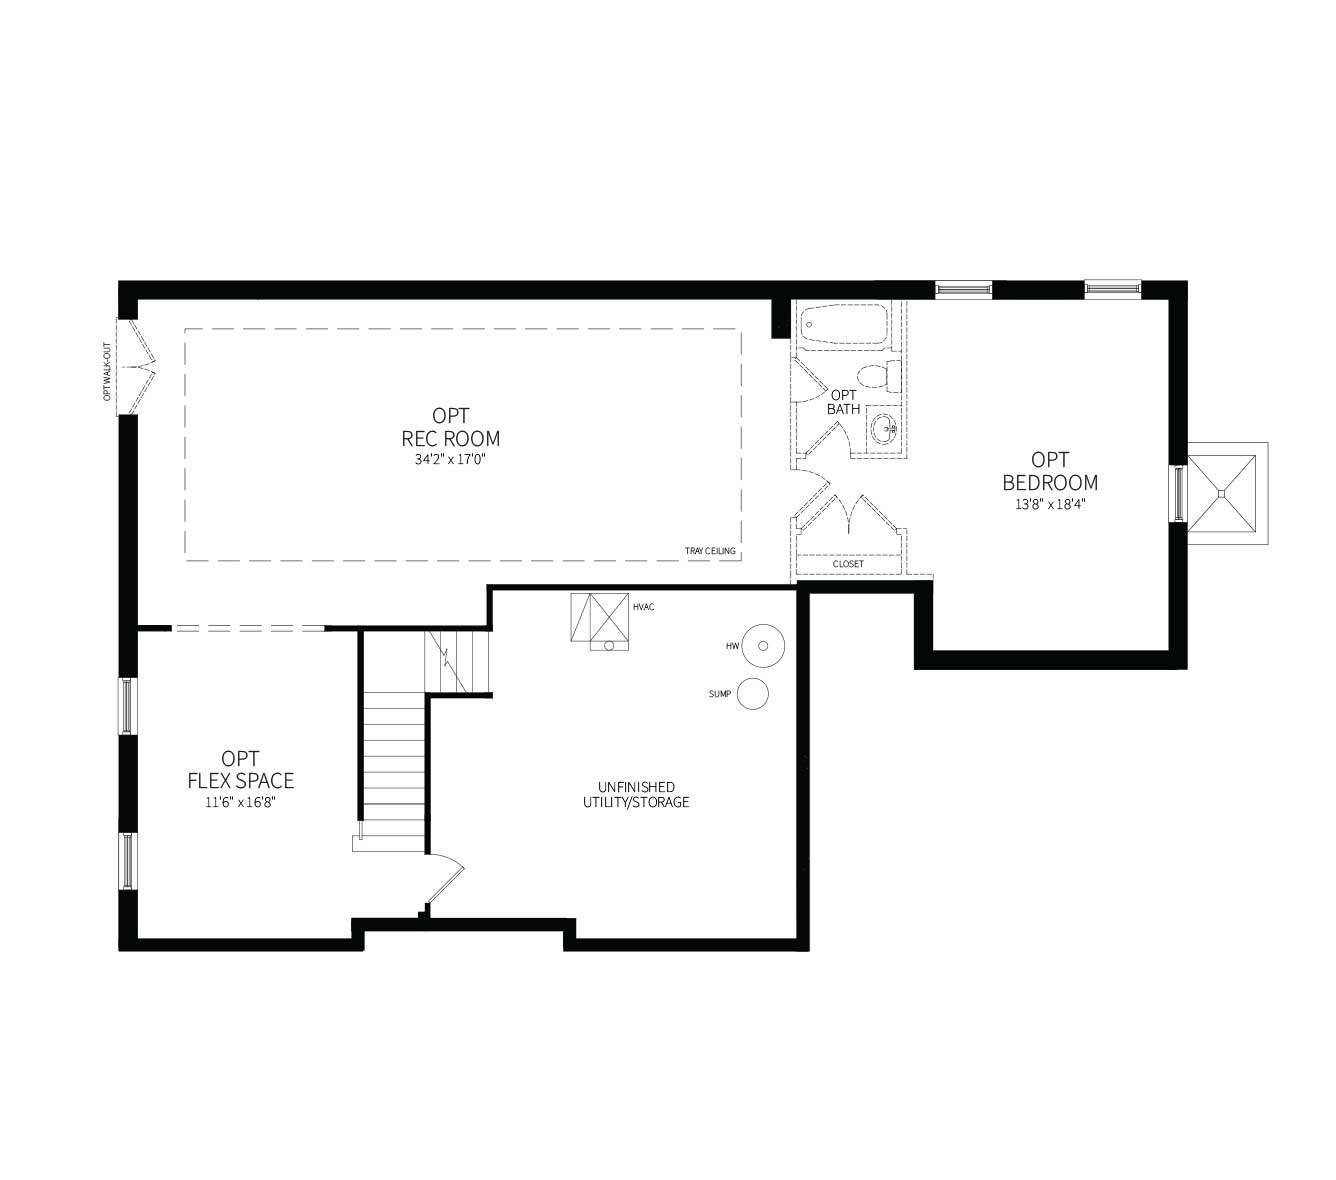 A proposed basement plan for the Clifton model home, showing rec room, bedroom/bath and flex space.